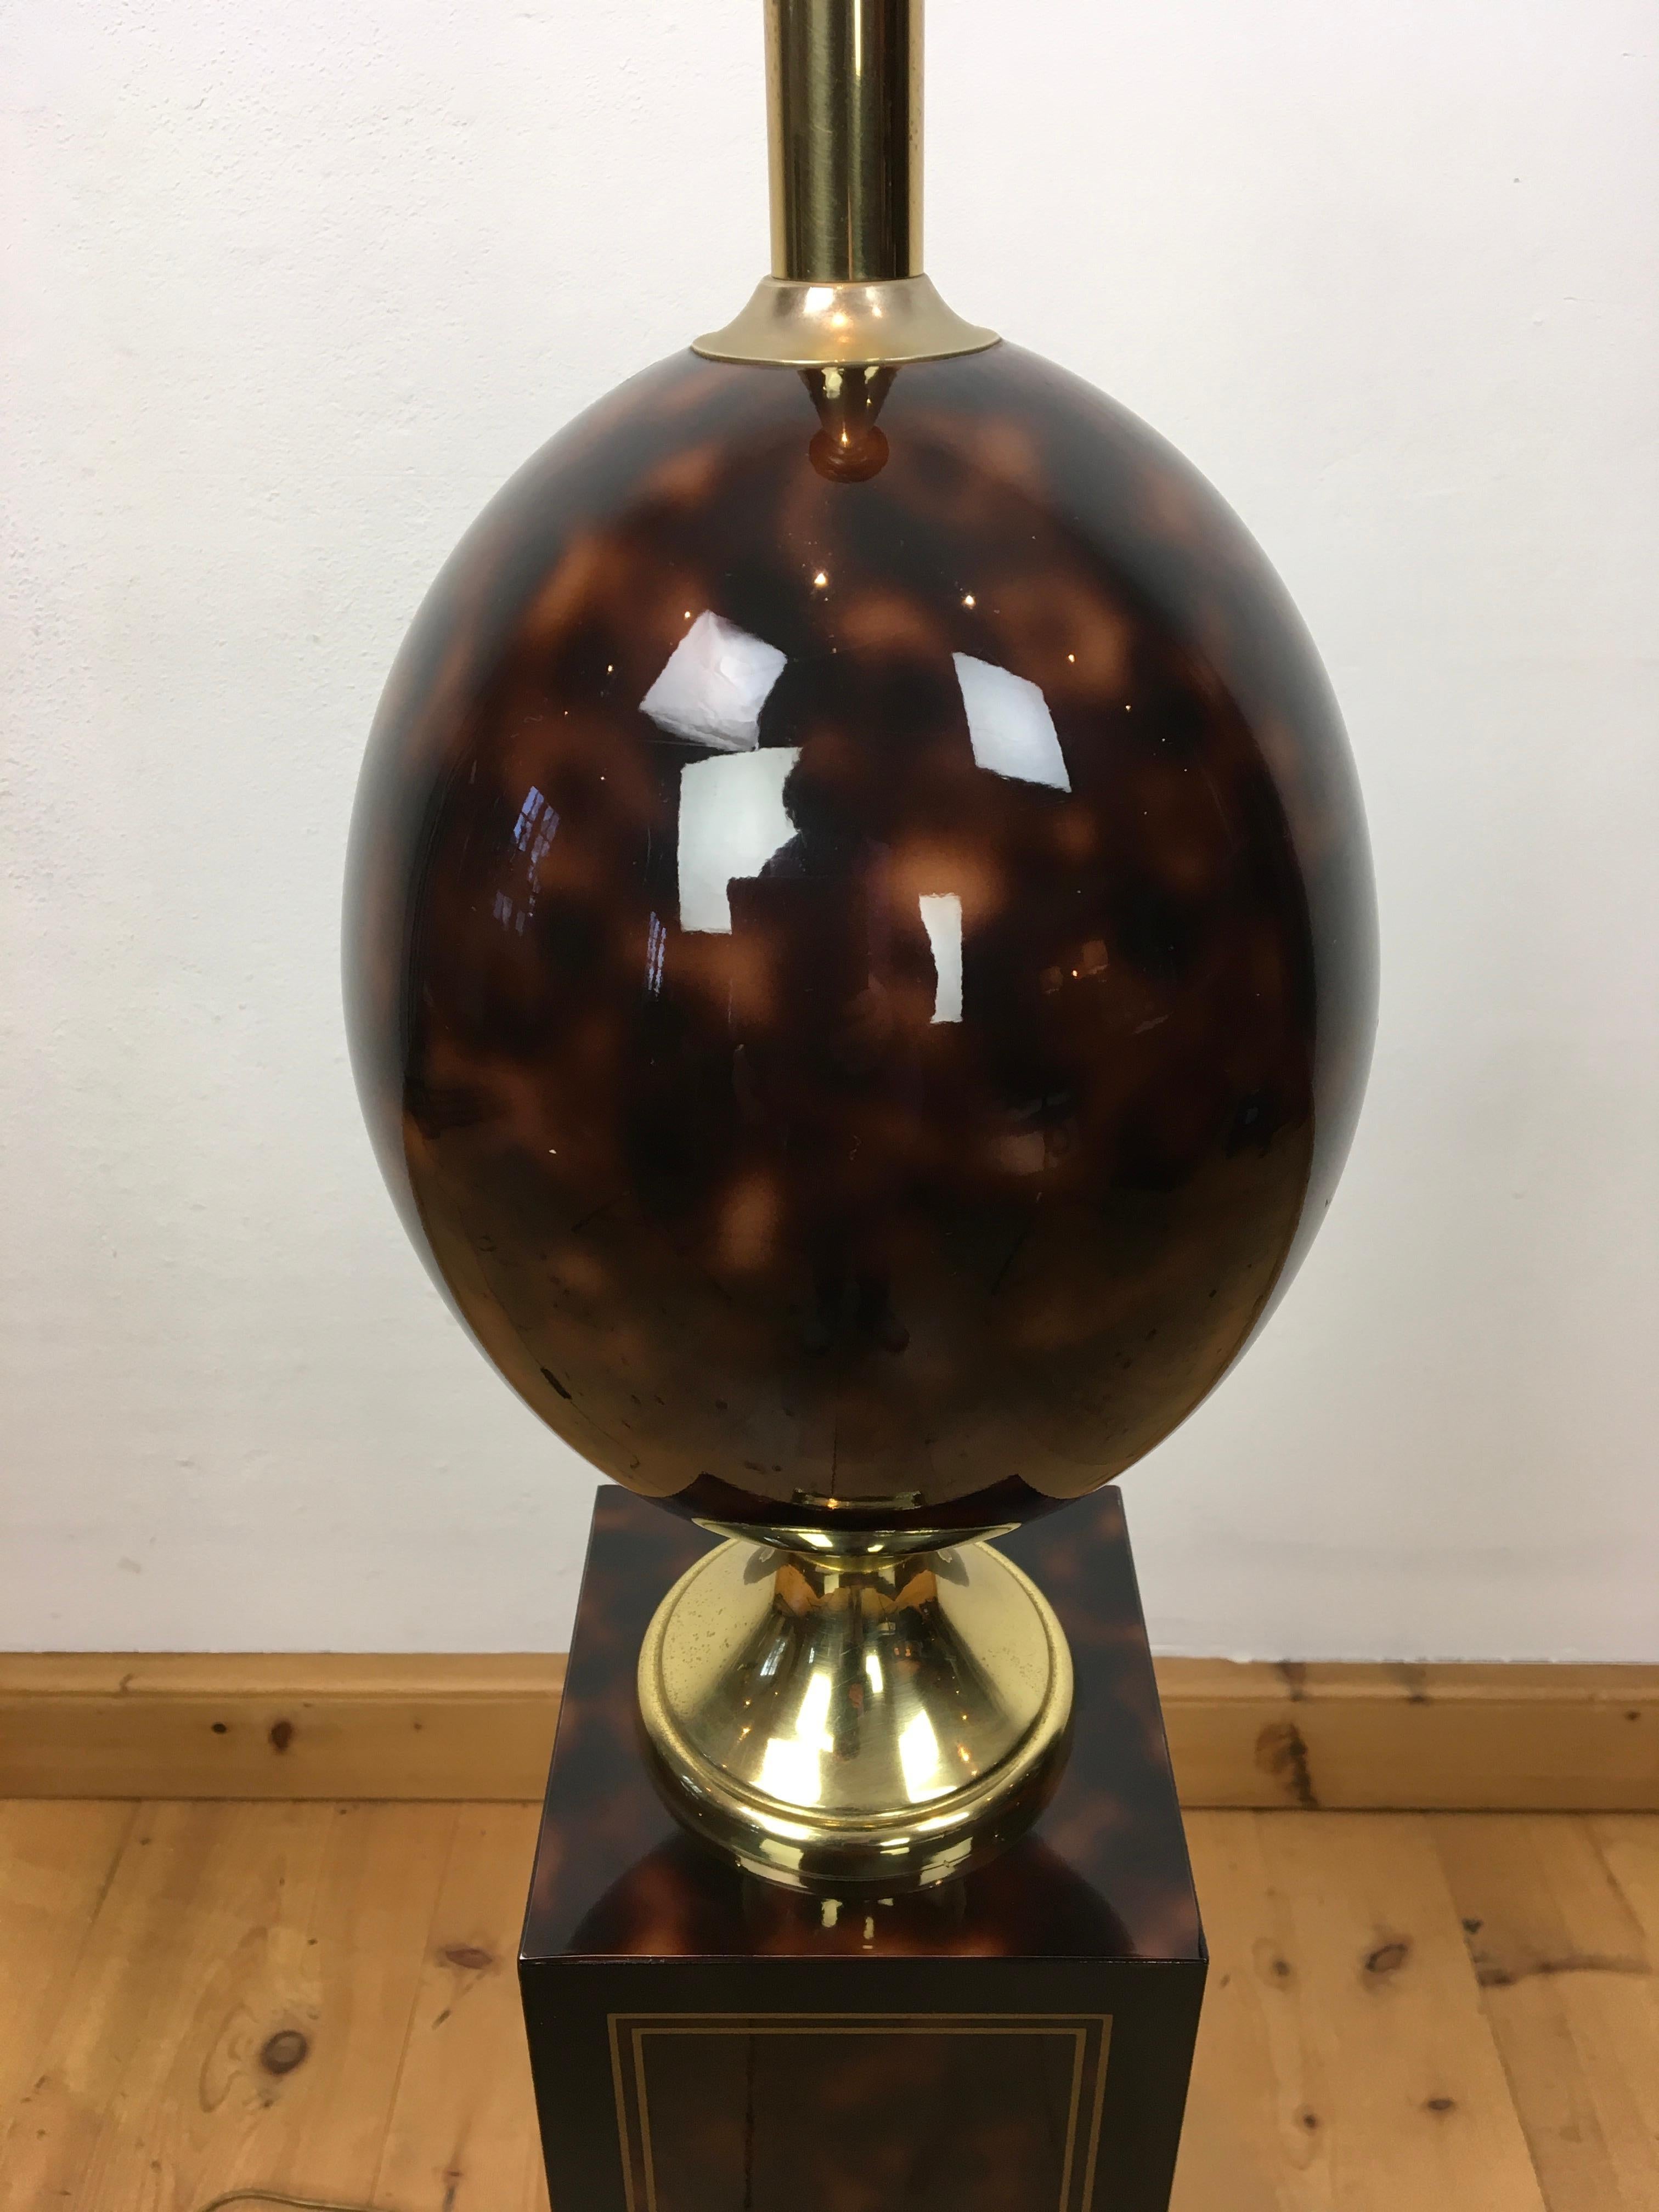 Ostrich egg floor lamp by Maison Le Dauphin France. 
This Hollywood Regency floor lamp has a toirtoiseshell design what makes this floorlamp so stylish. 
A French floor lamp from the period 1970 - 1980.
Laquered wooden base, ceramic egg and brass